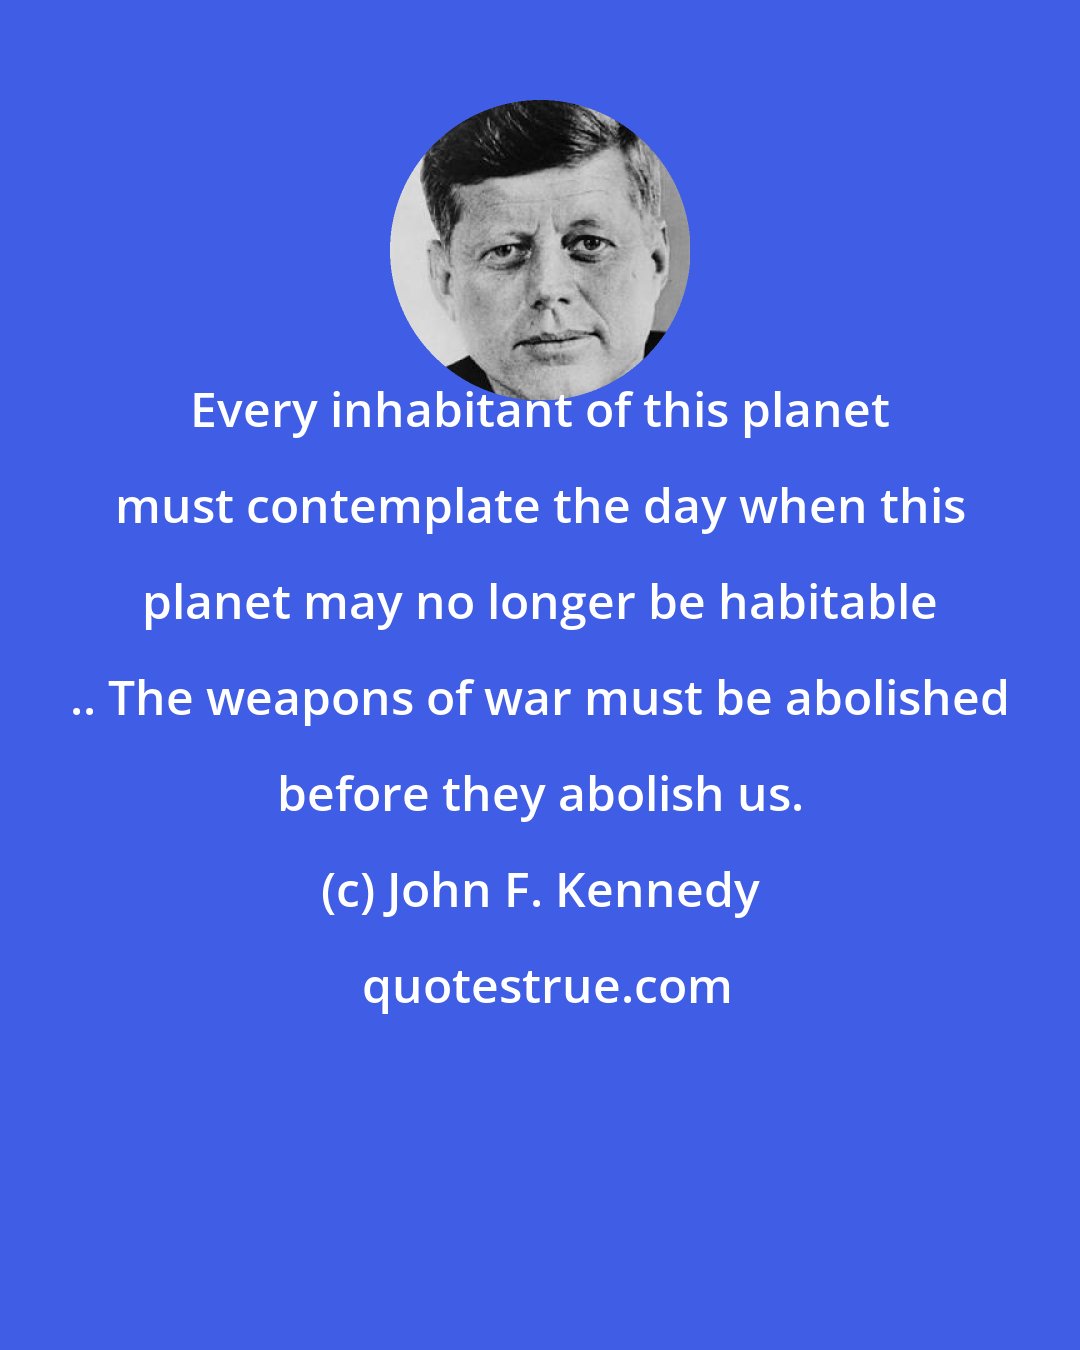 John F. Kennedy: Every inhabitant of this planet must contemplate the day when this planet may no longer be habitable .. The weapons of war must be abolished before they abolish us.